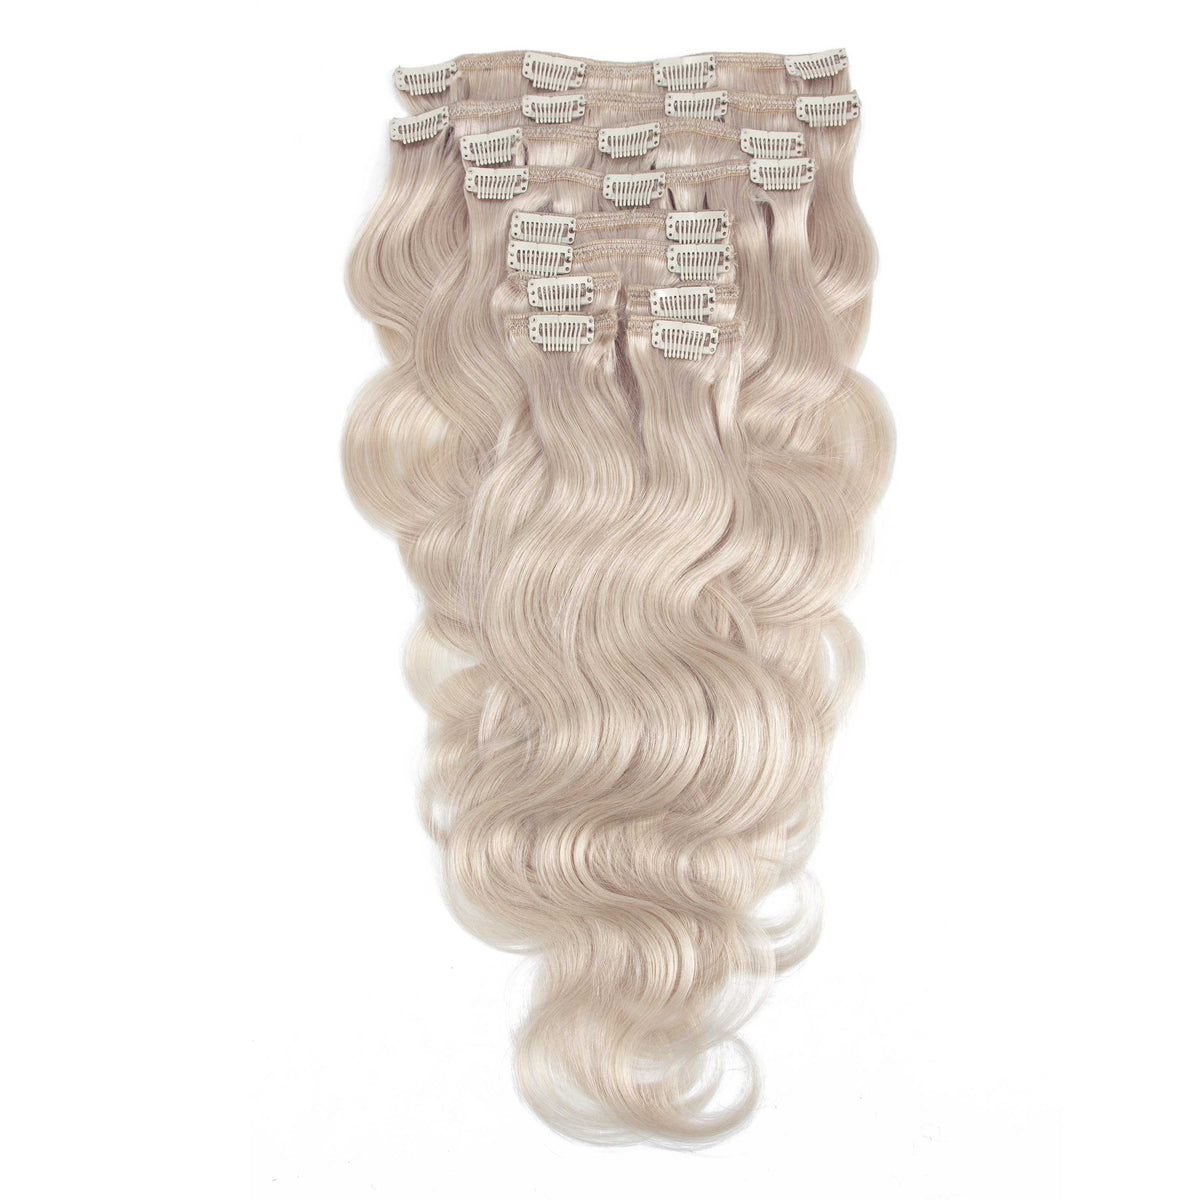 Curly Human Hair Extensions, Wavy Human Hair Extensions